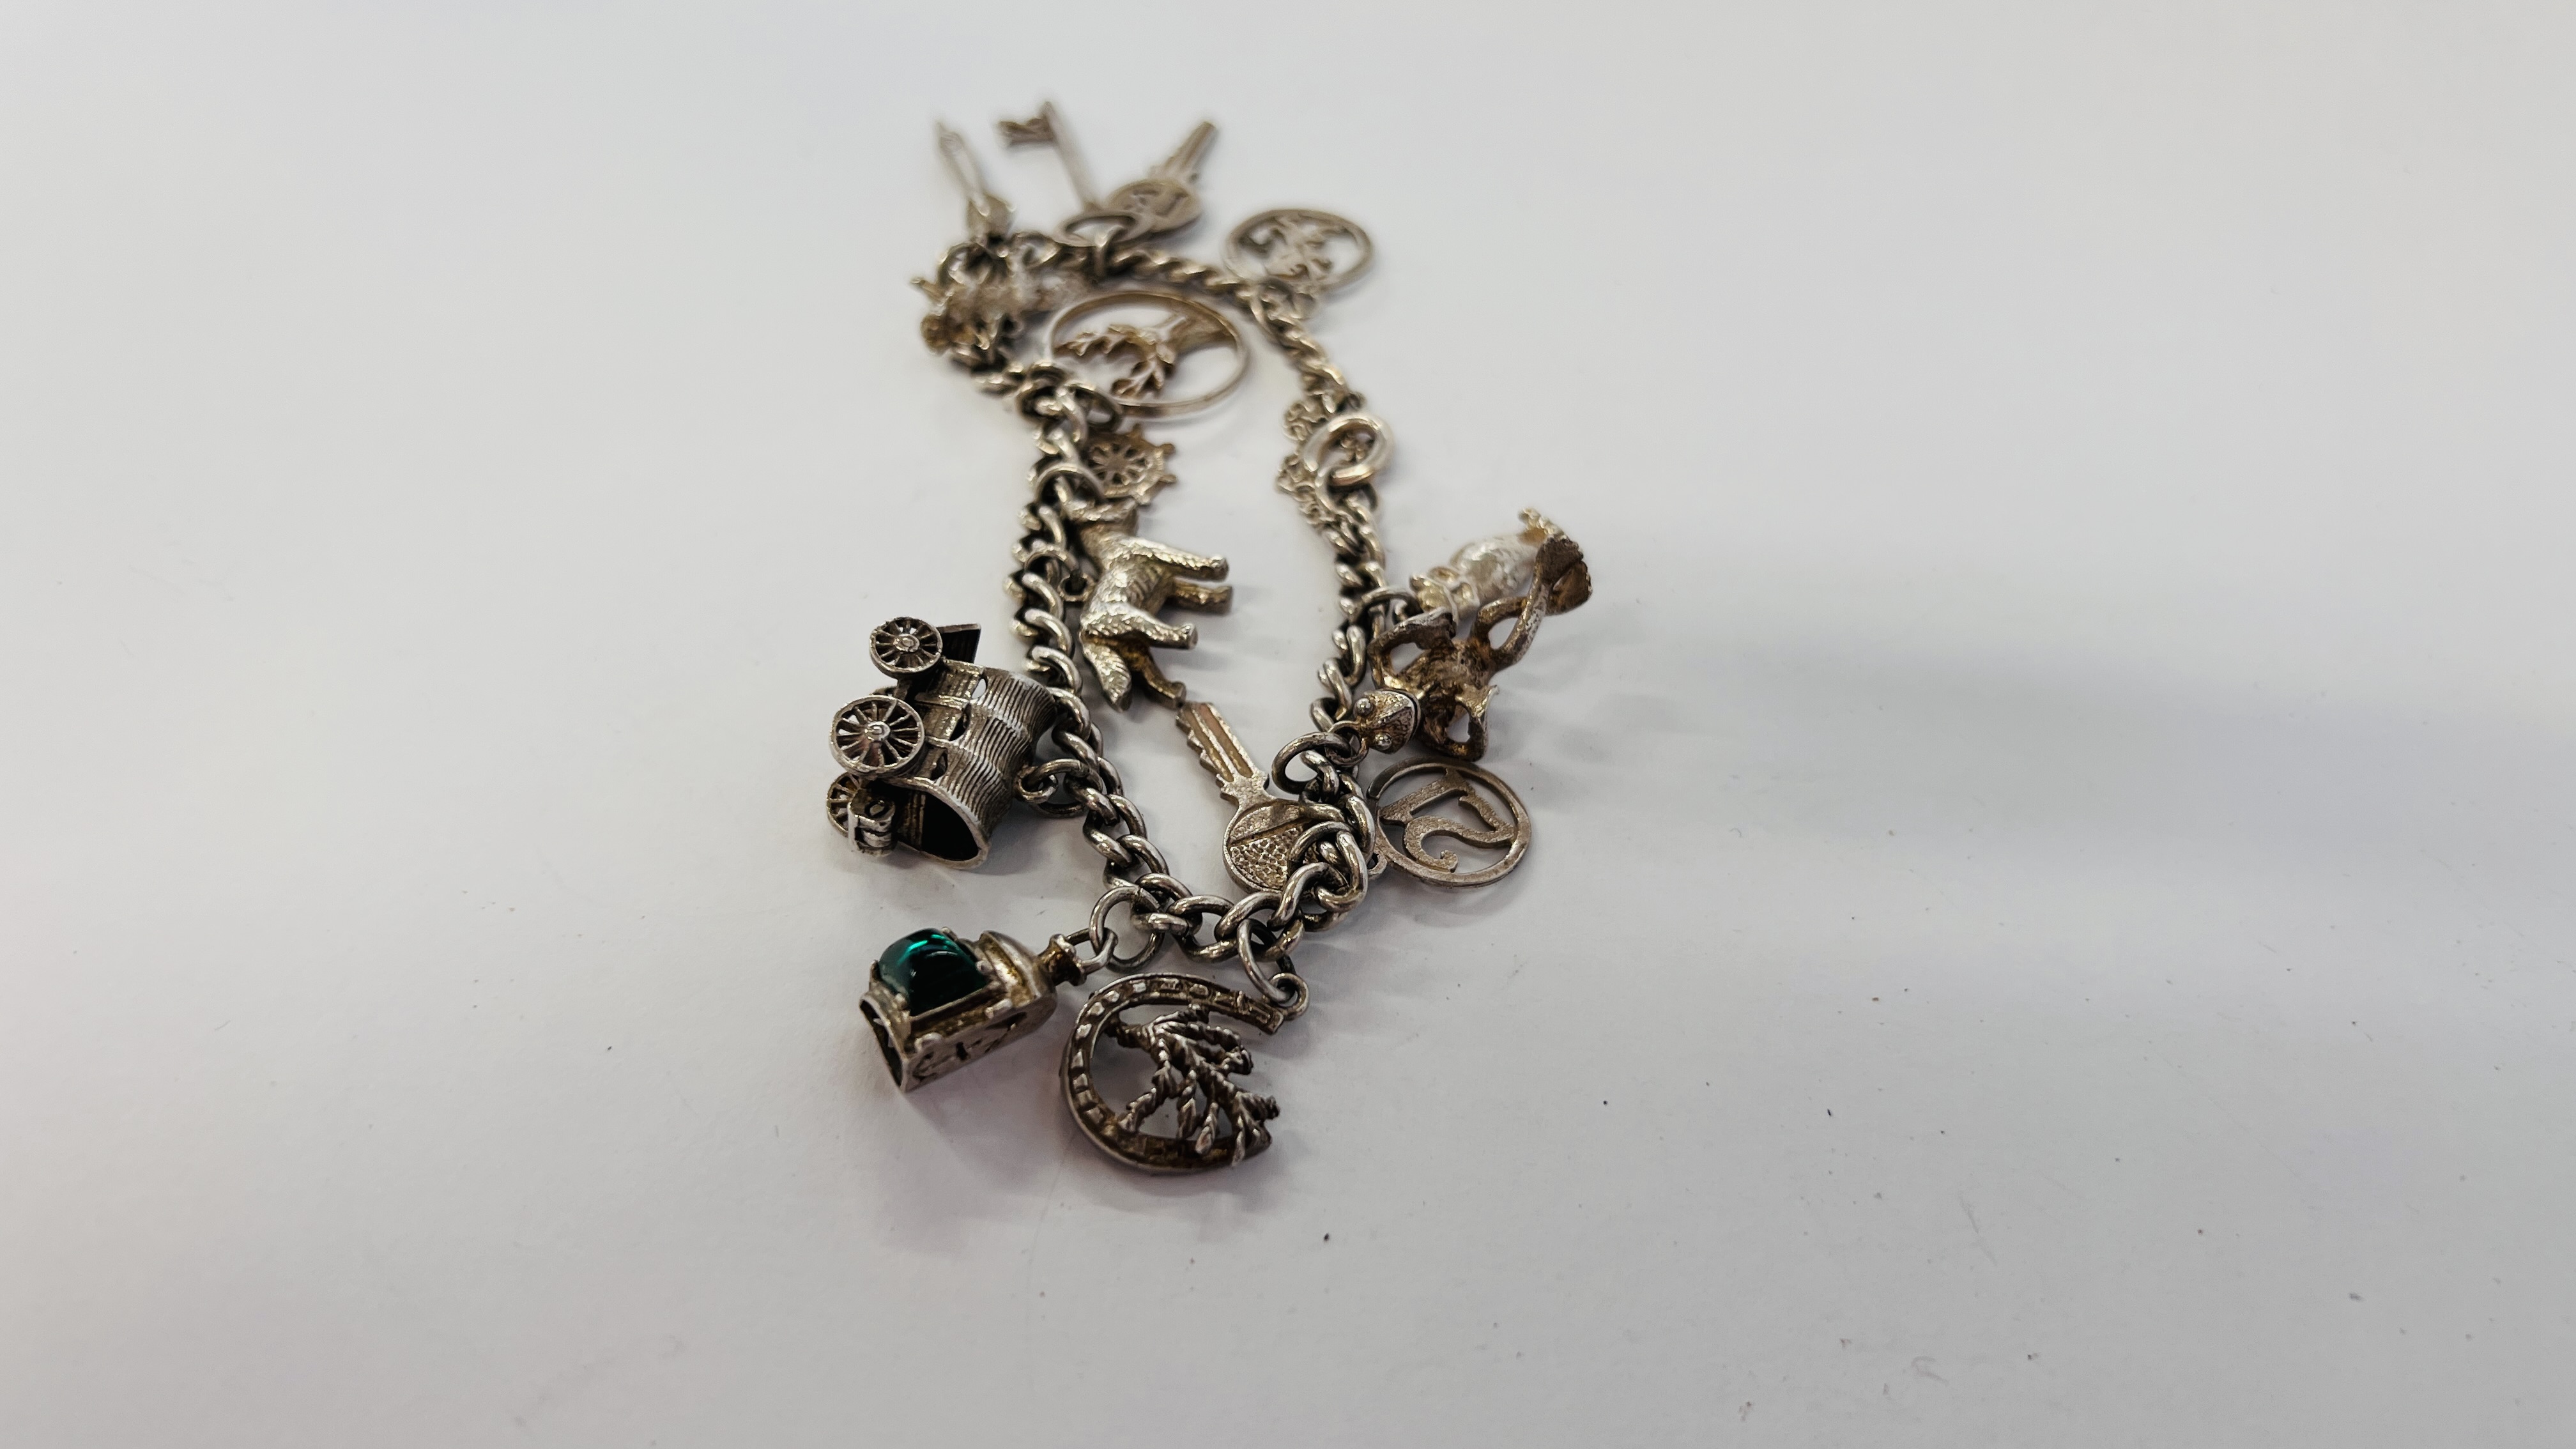 VINTAGE 925 SILVER BRACELET WITH 13 CHARMS ATTACHED. - Image 5 of 6